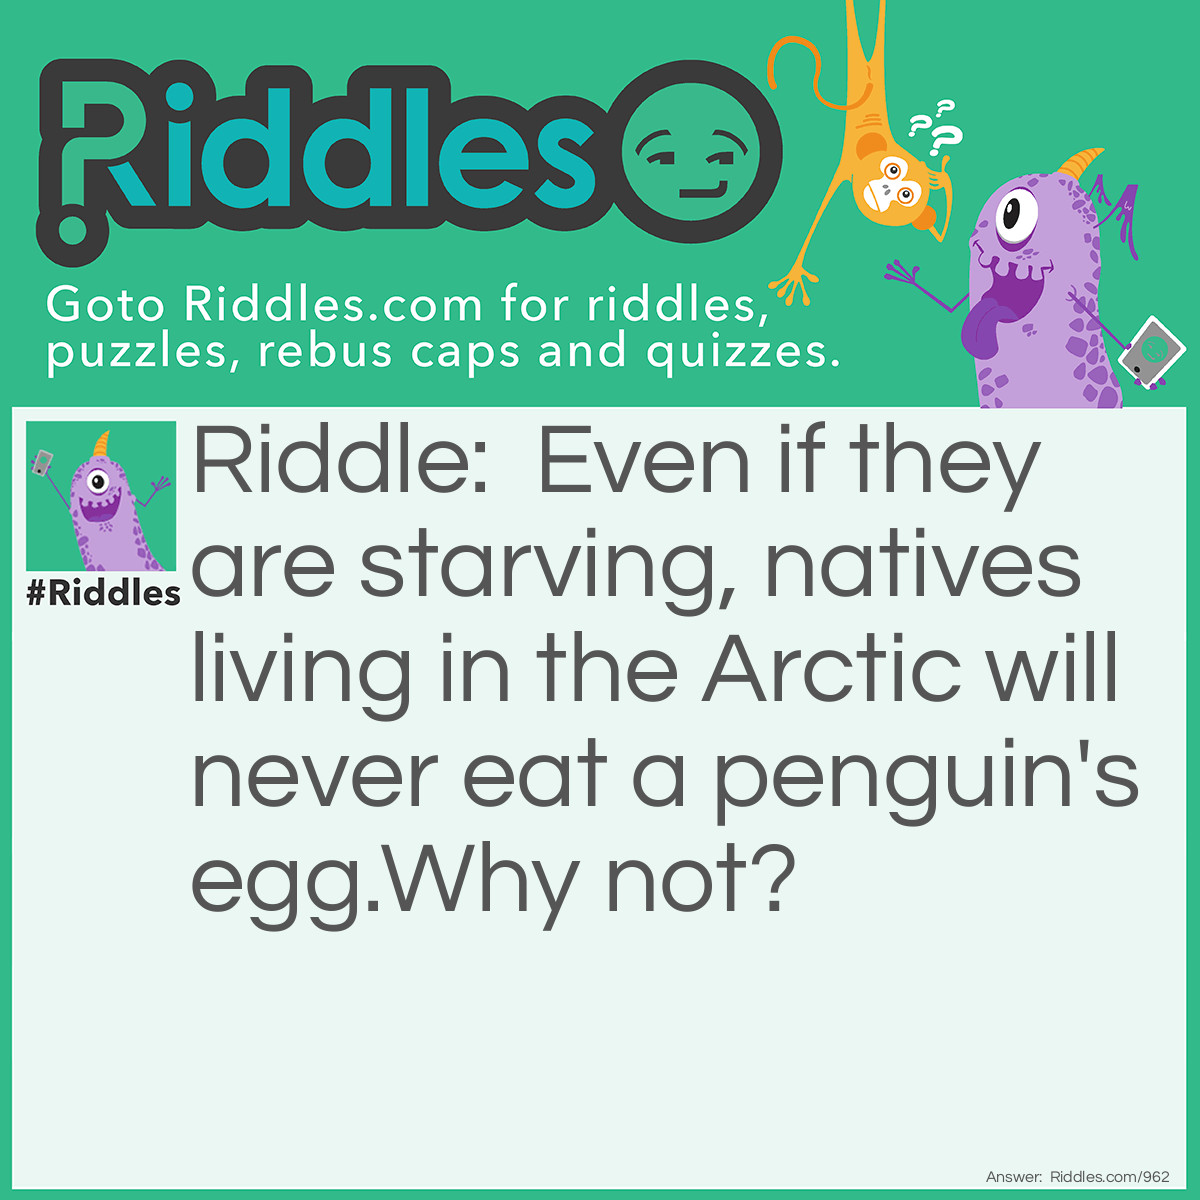 Riddle: Even if they are starving, natives living in the Arctic will never eat a penguin's egg.
Why not? Answer: Penguins only live in Antarctica.